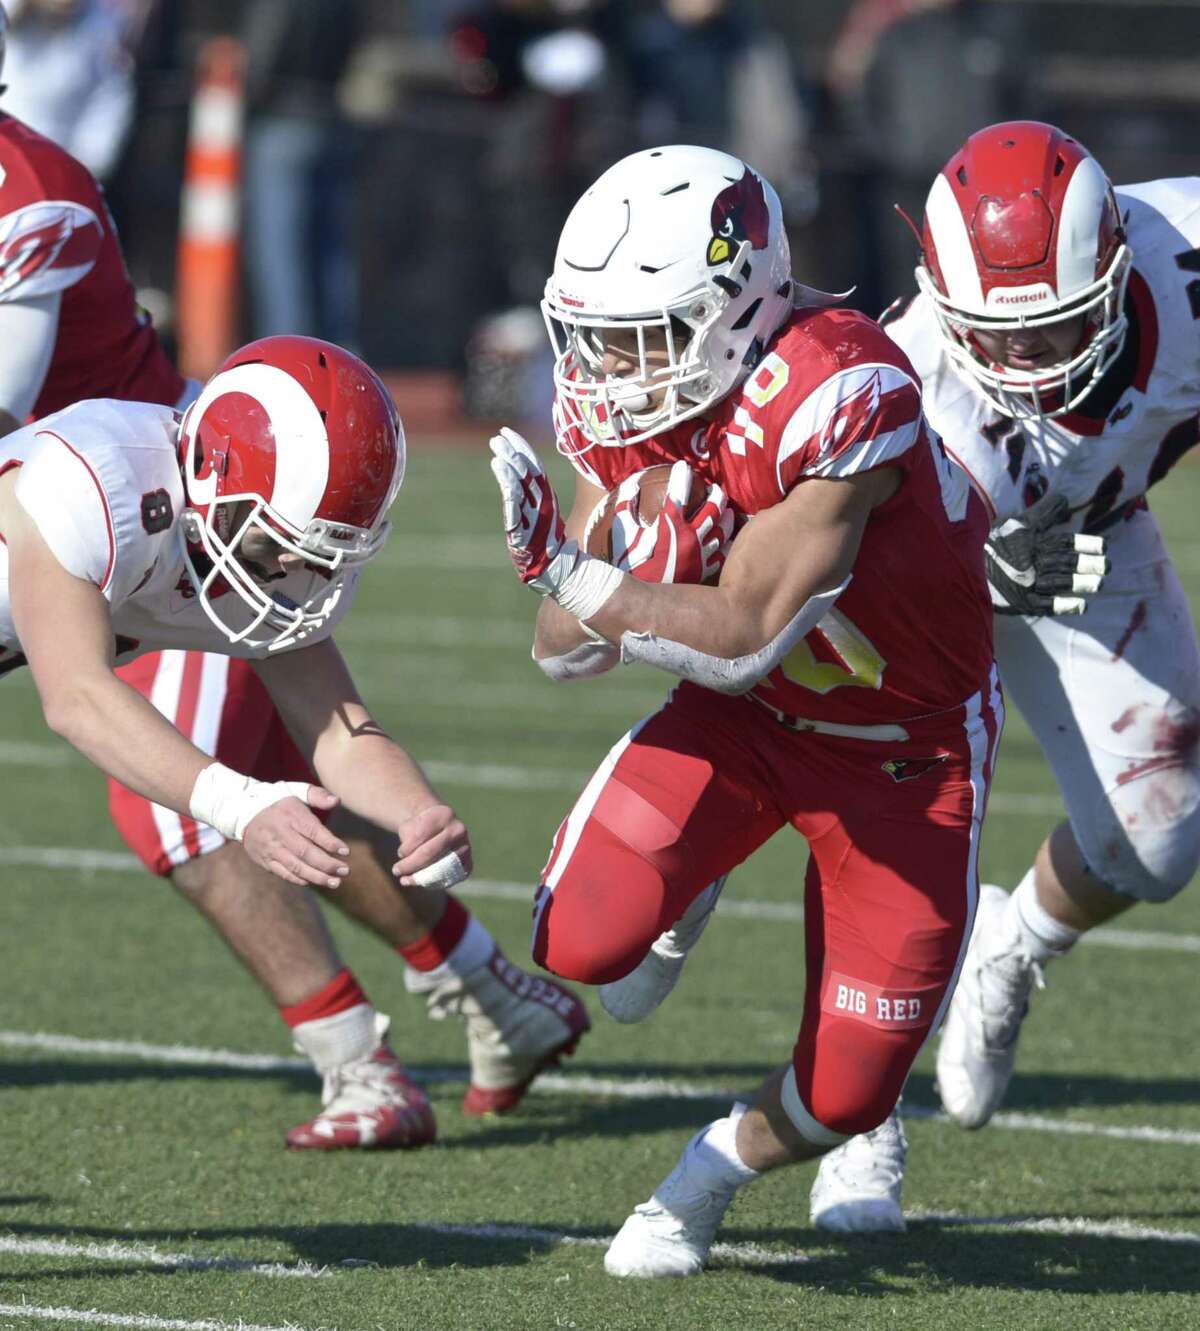 Photographs from the Connecticut high school Class LL football championship game between Greenwich and New Canaan high schools, Saturday morning, December 8, 2018, at Boyle Stadium, Stamford High School, Stamford, Conn.